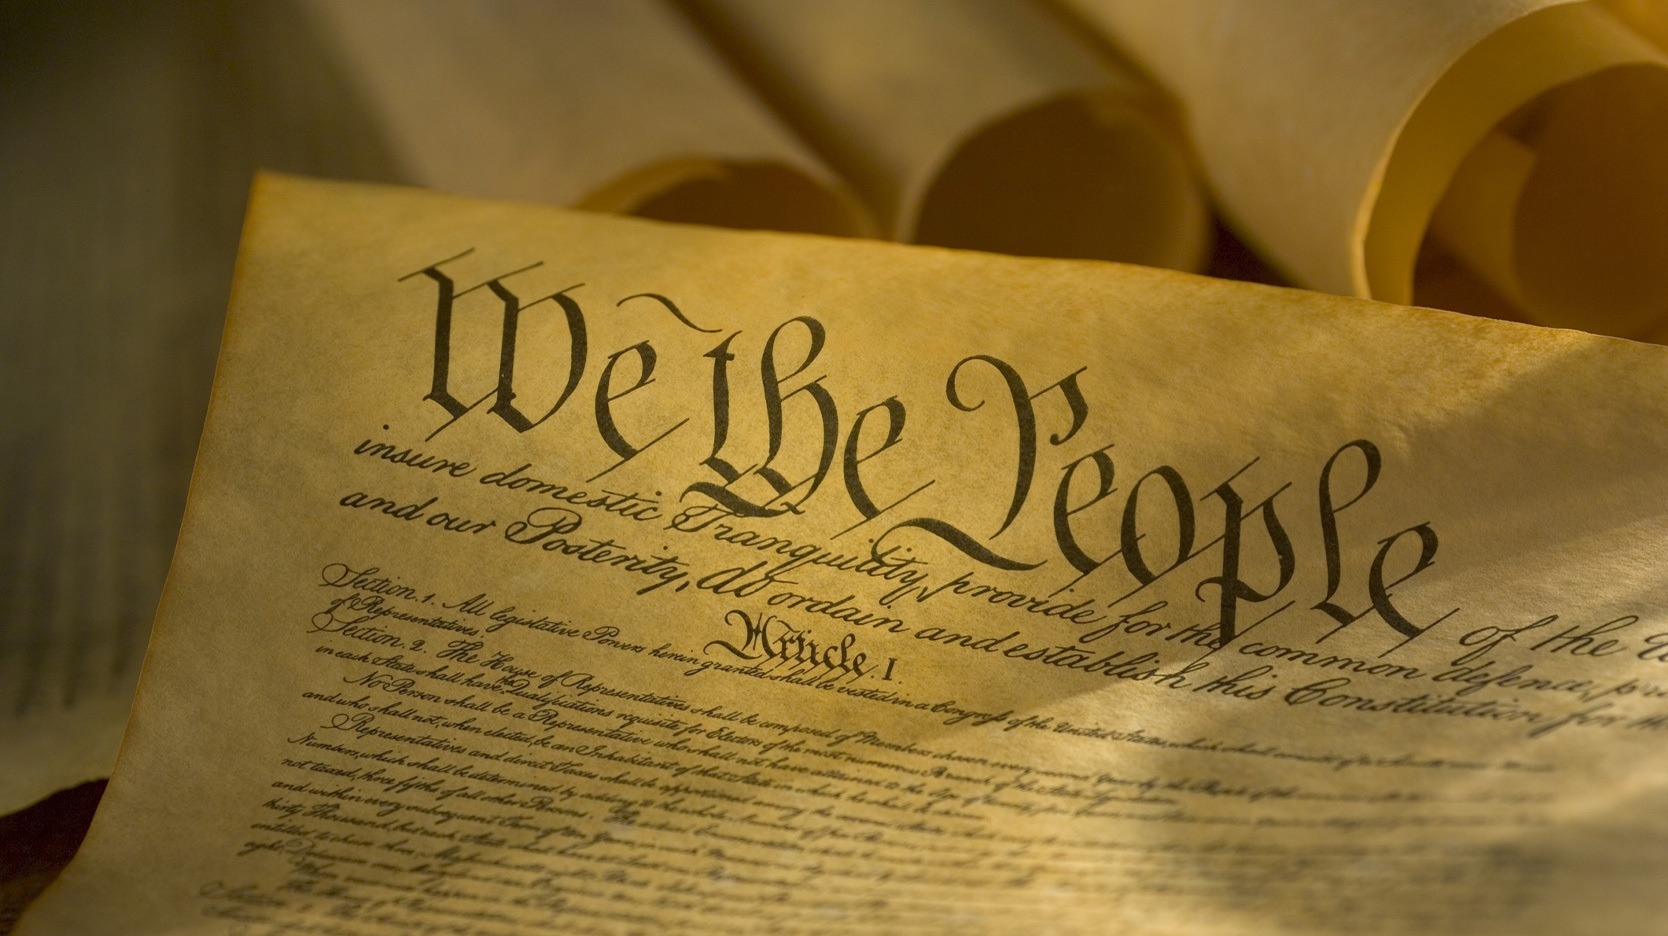 USA Constitution - We the People